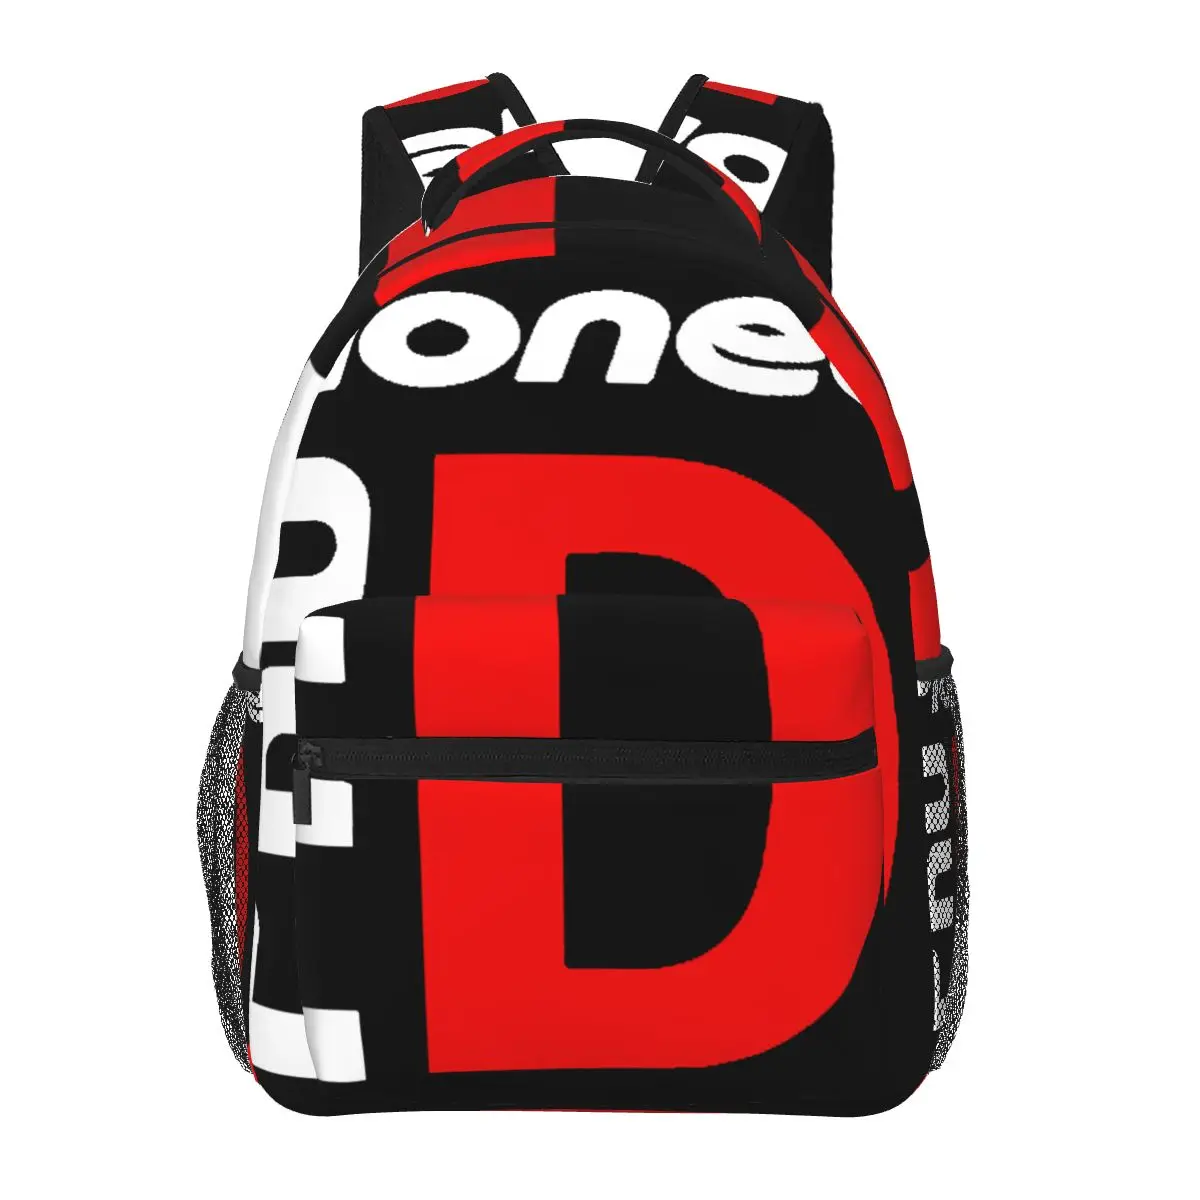 

PIONEER PRO DJ Casual Backpack Unisex Students Leisure Travel Computer Backpack